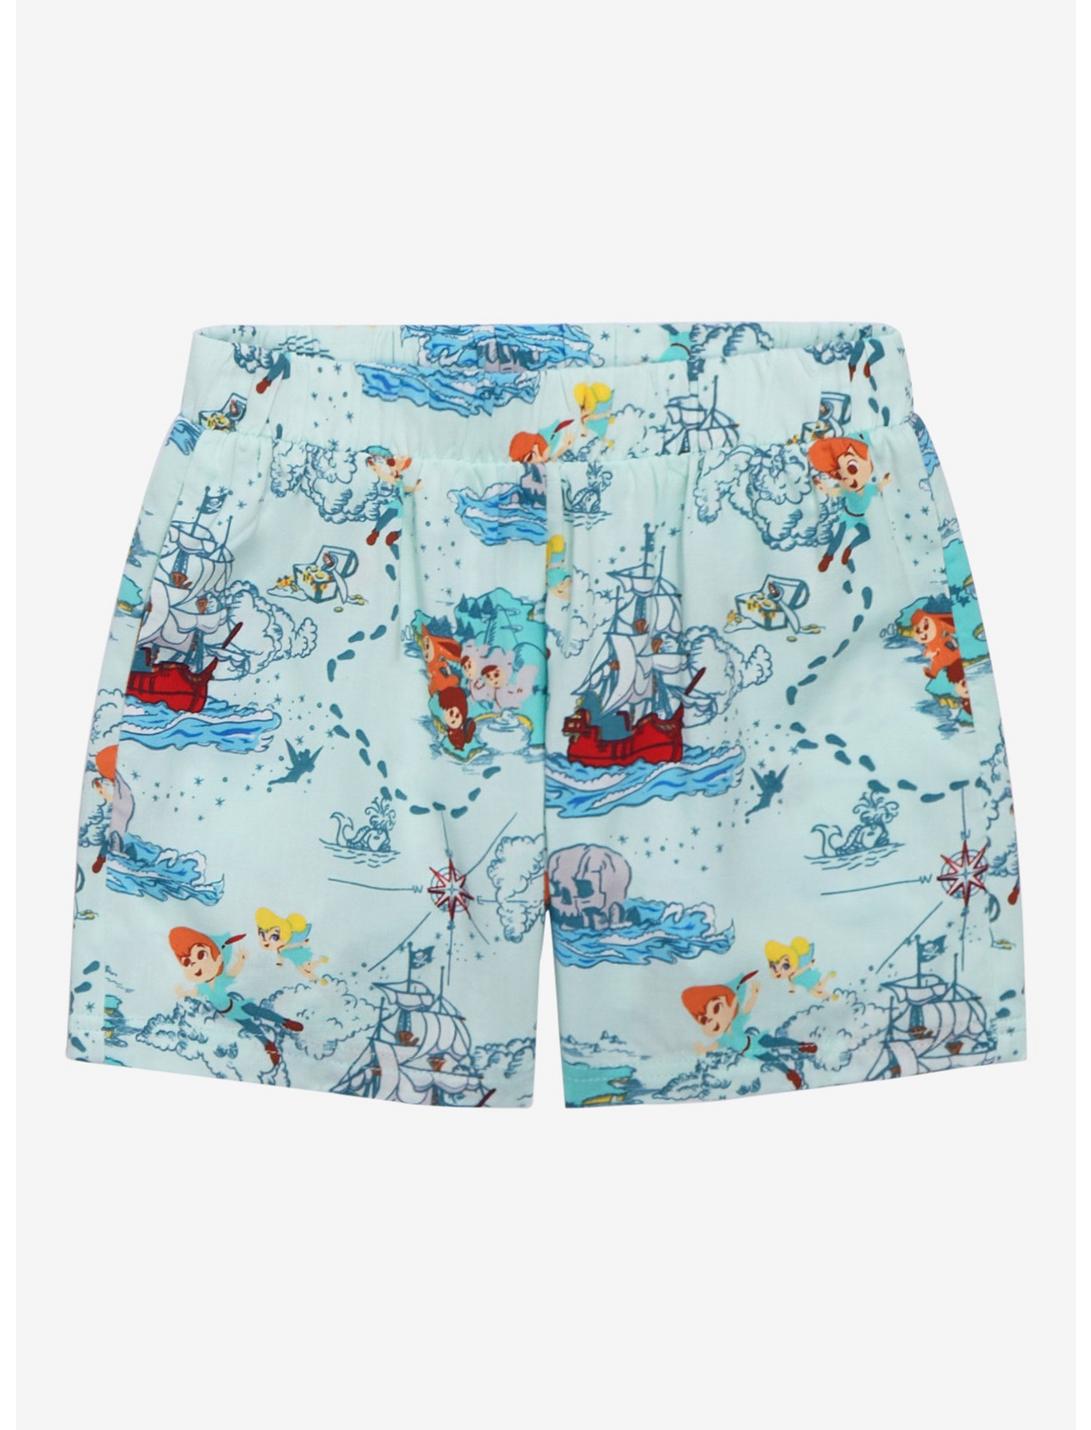 Disney Peter Pan Neverland Map Allover Print Shorts - BoxLunch Exclusive, MINT GREEN, hi-res